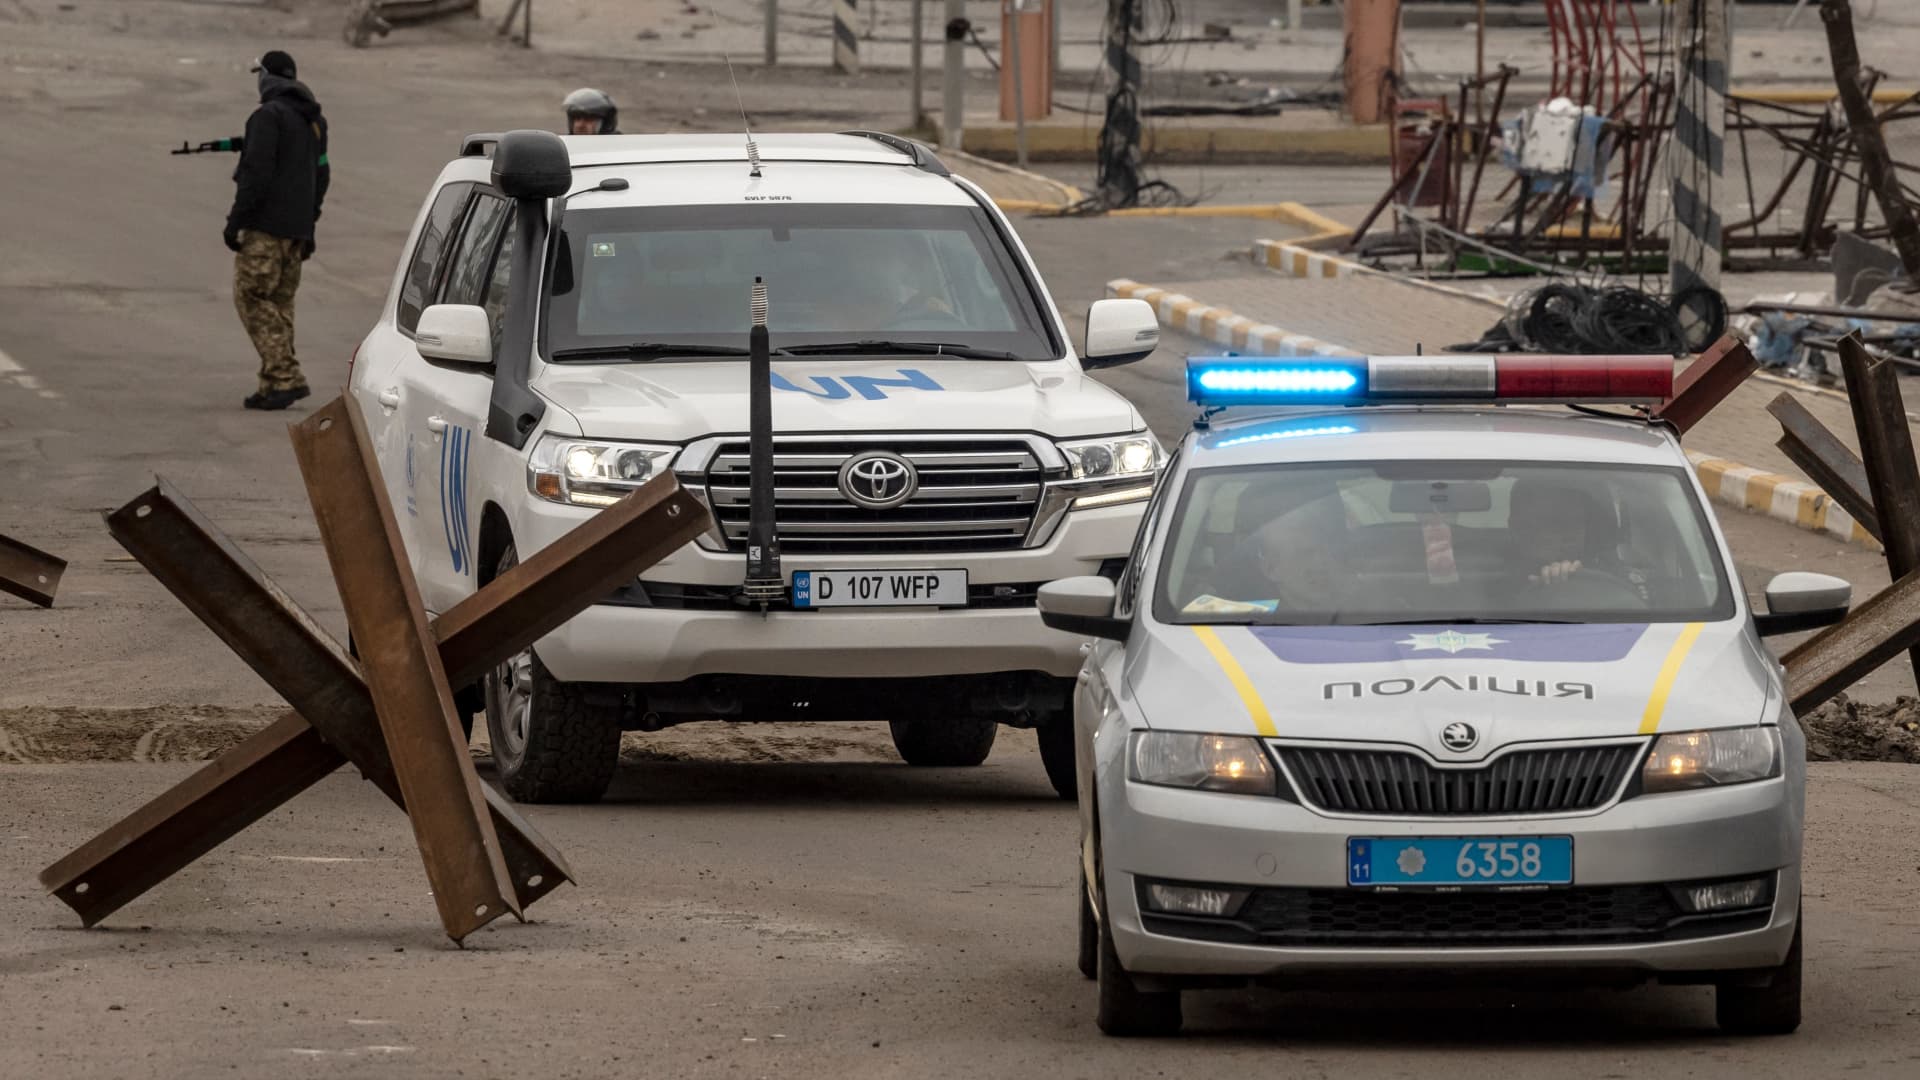 A UN and a police car seen in in Bucha, on the outskirts of Kyiv, on April 13, 2022, amid Russia's military invasion of Ukraine.